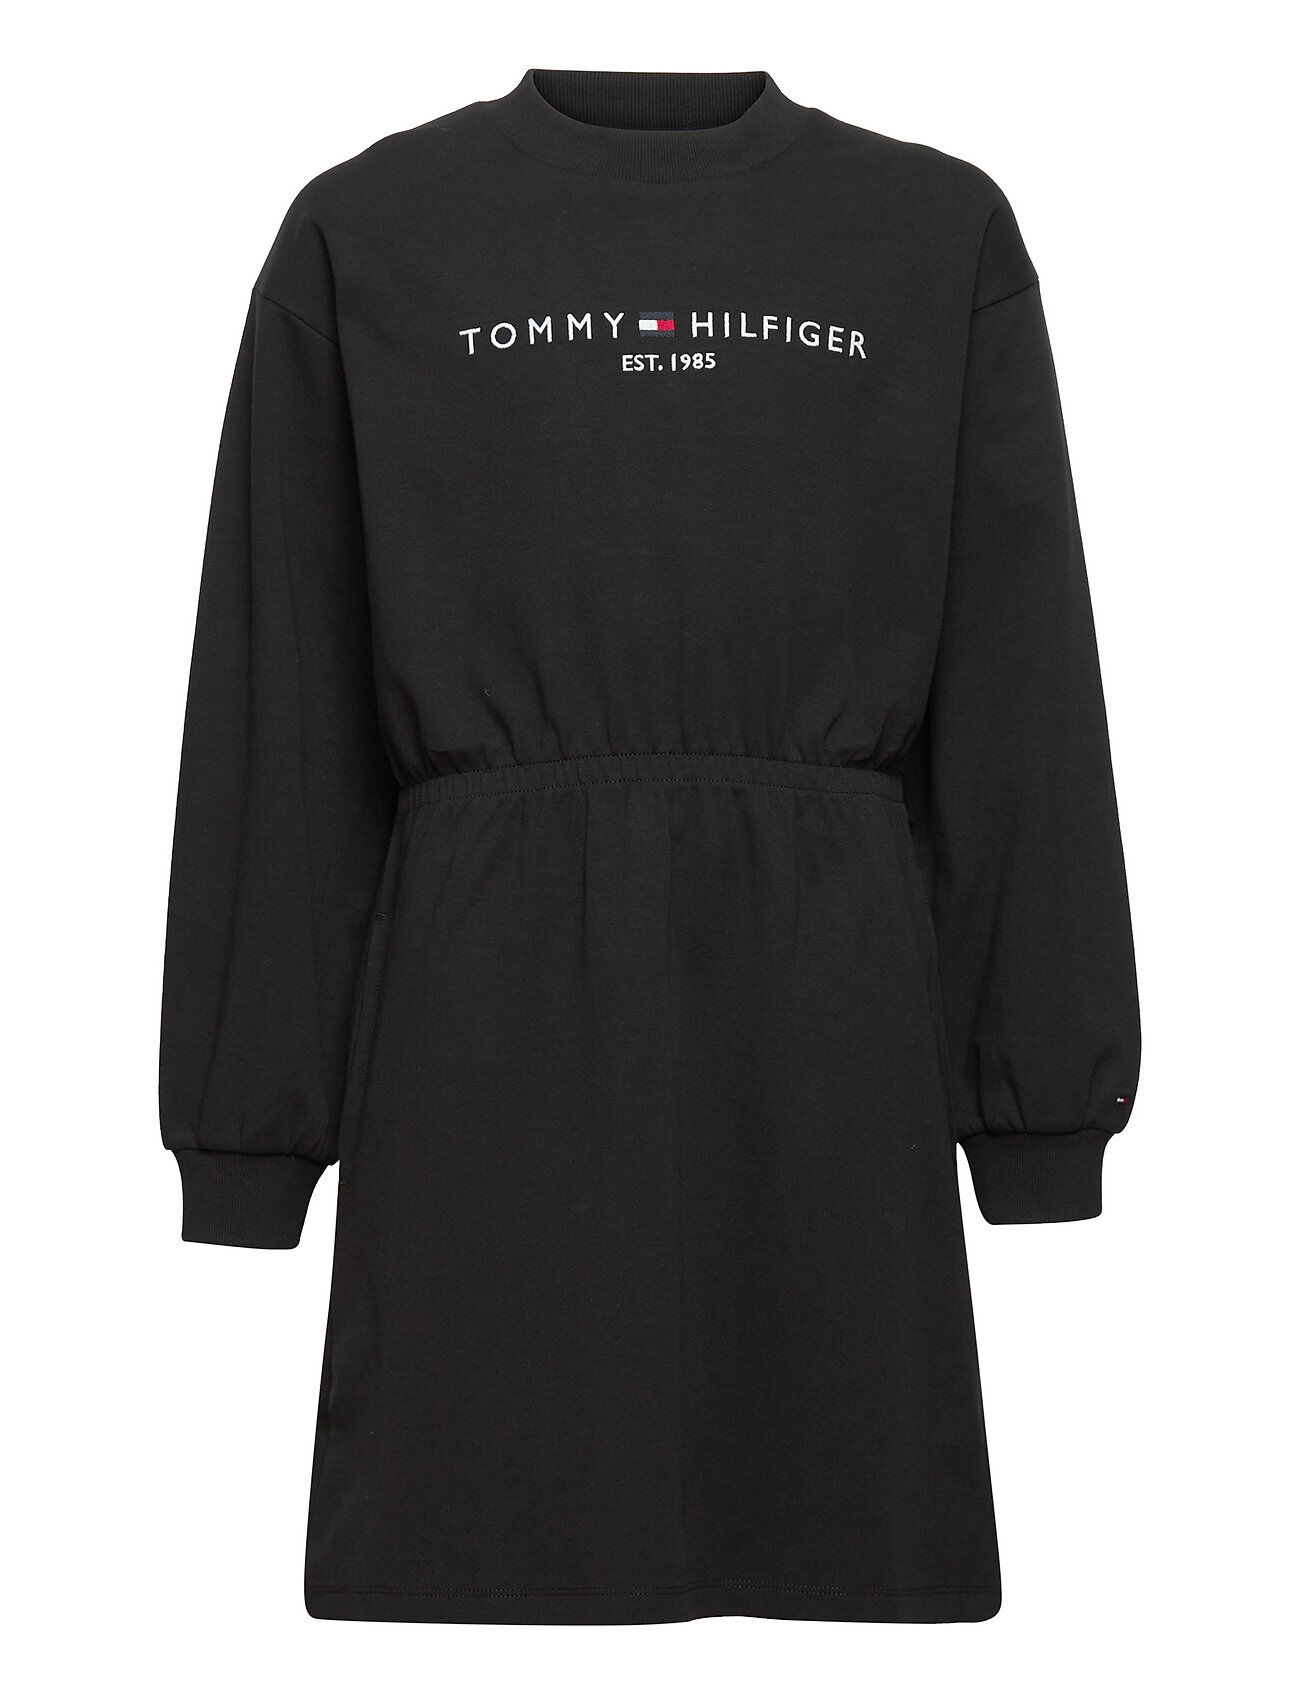 Tommy Hilfiger Essential Sweat Dress Dresses & Skirts Dresses Casual Dresses Long-sleeved Casual Dresses Svart Tommy Hilfiger